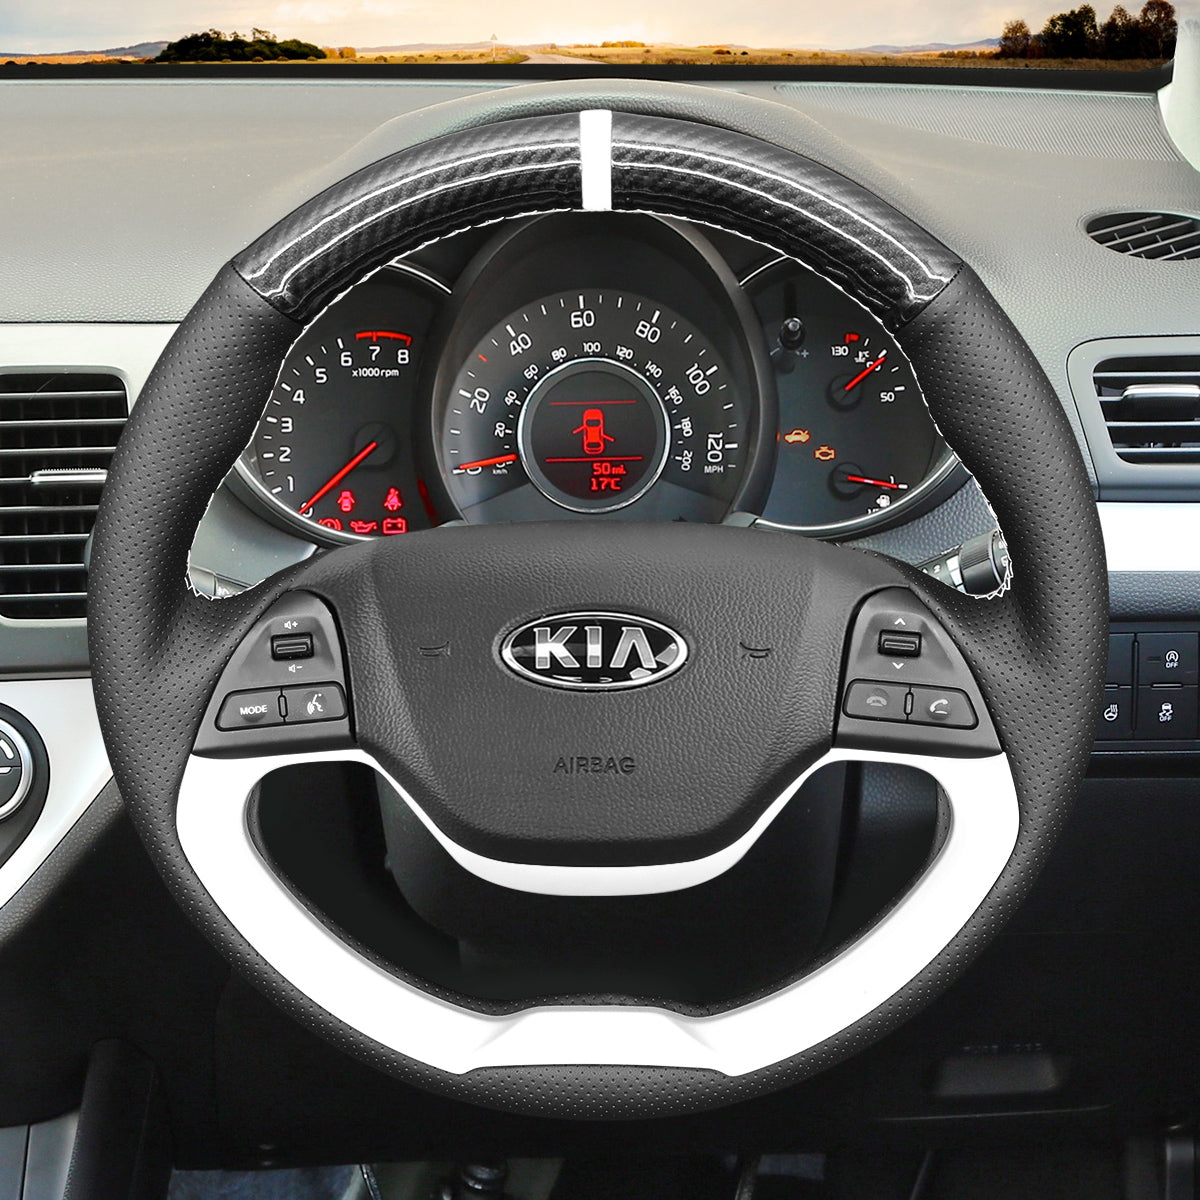 MEWANT Hand Stitch Car Steering Wheel Cover for Kia Picanto 2 2011-2017